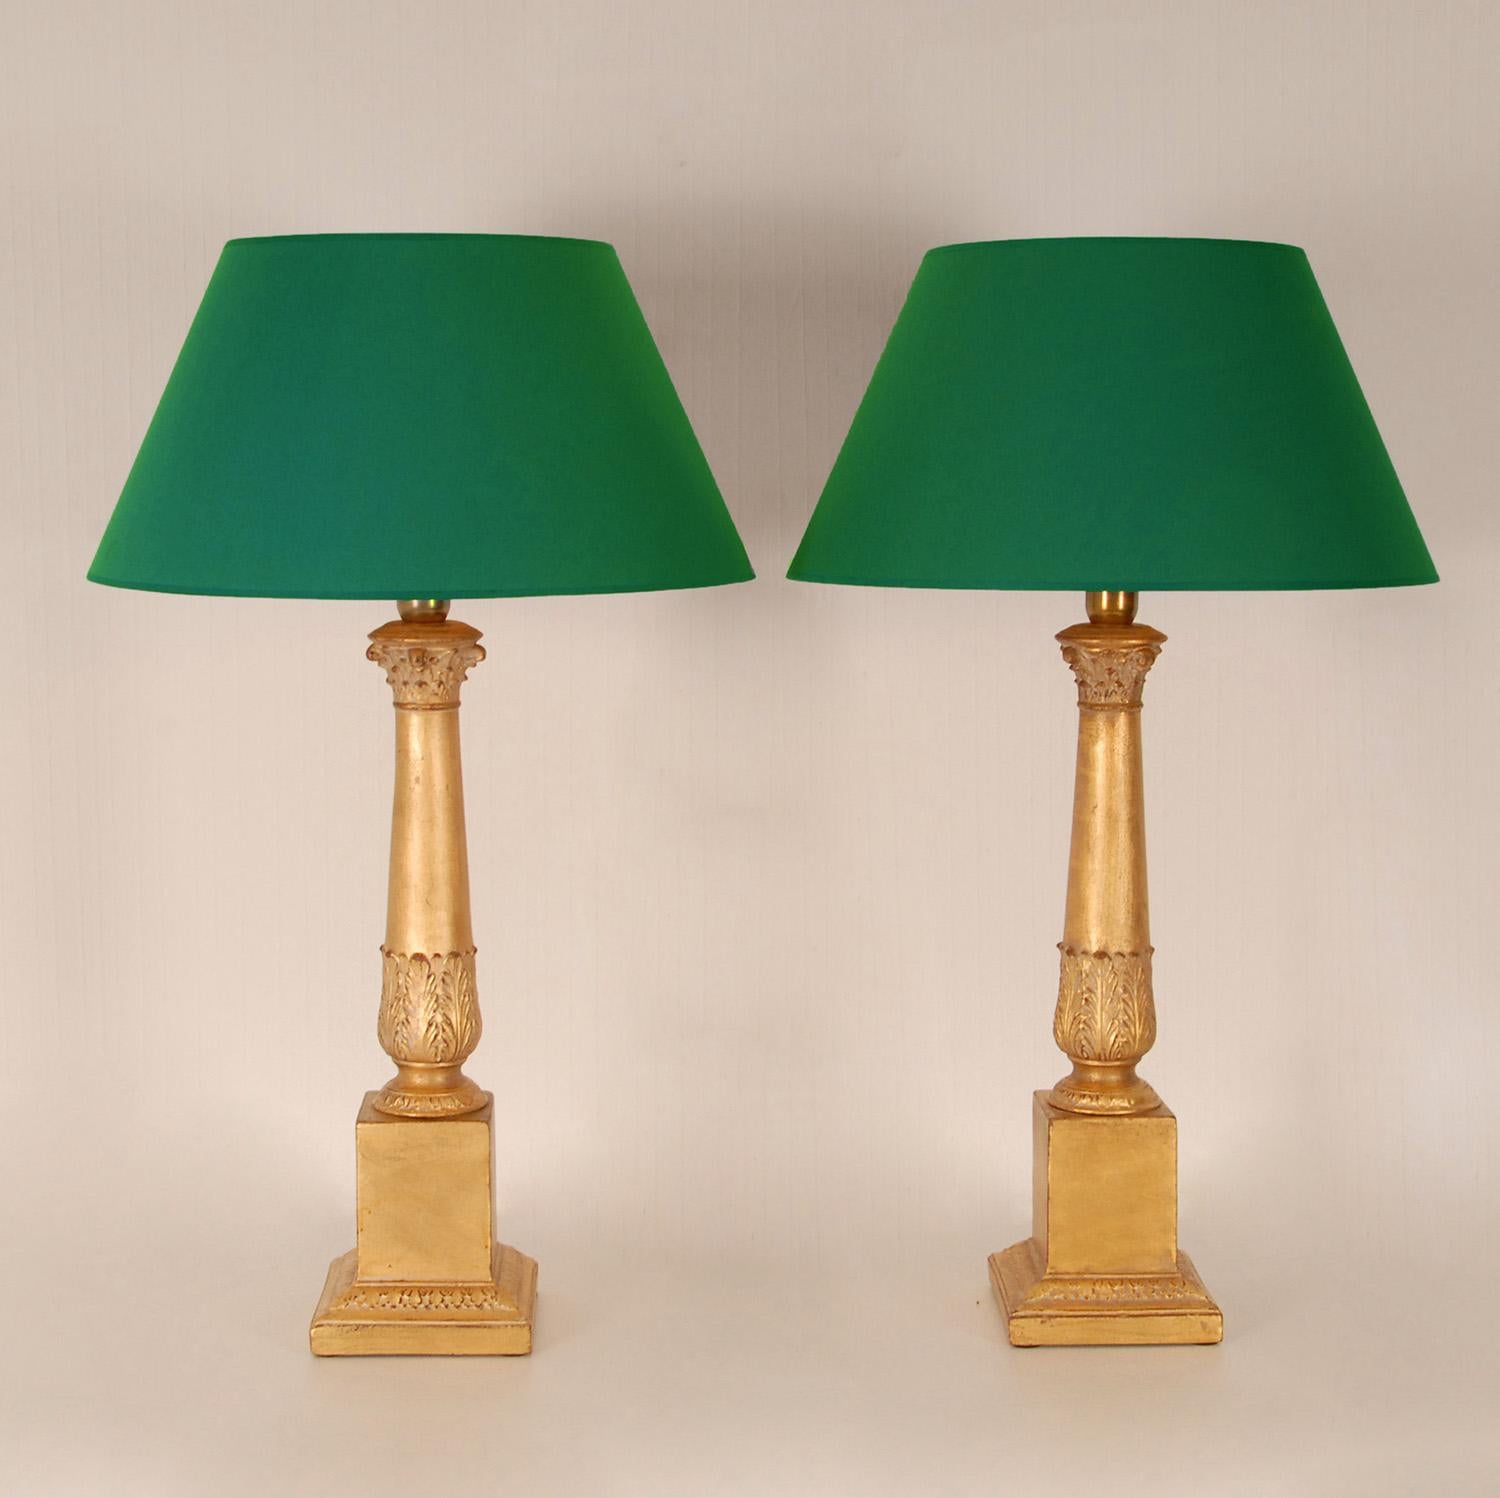 Vintage Italian Ceramic Lamps Gold Gilded Corinthian Column Table Lamps a Pair For Sale 6